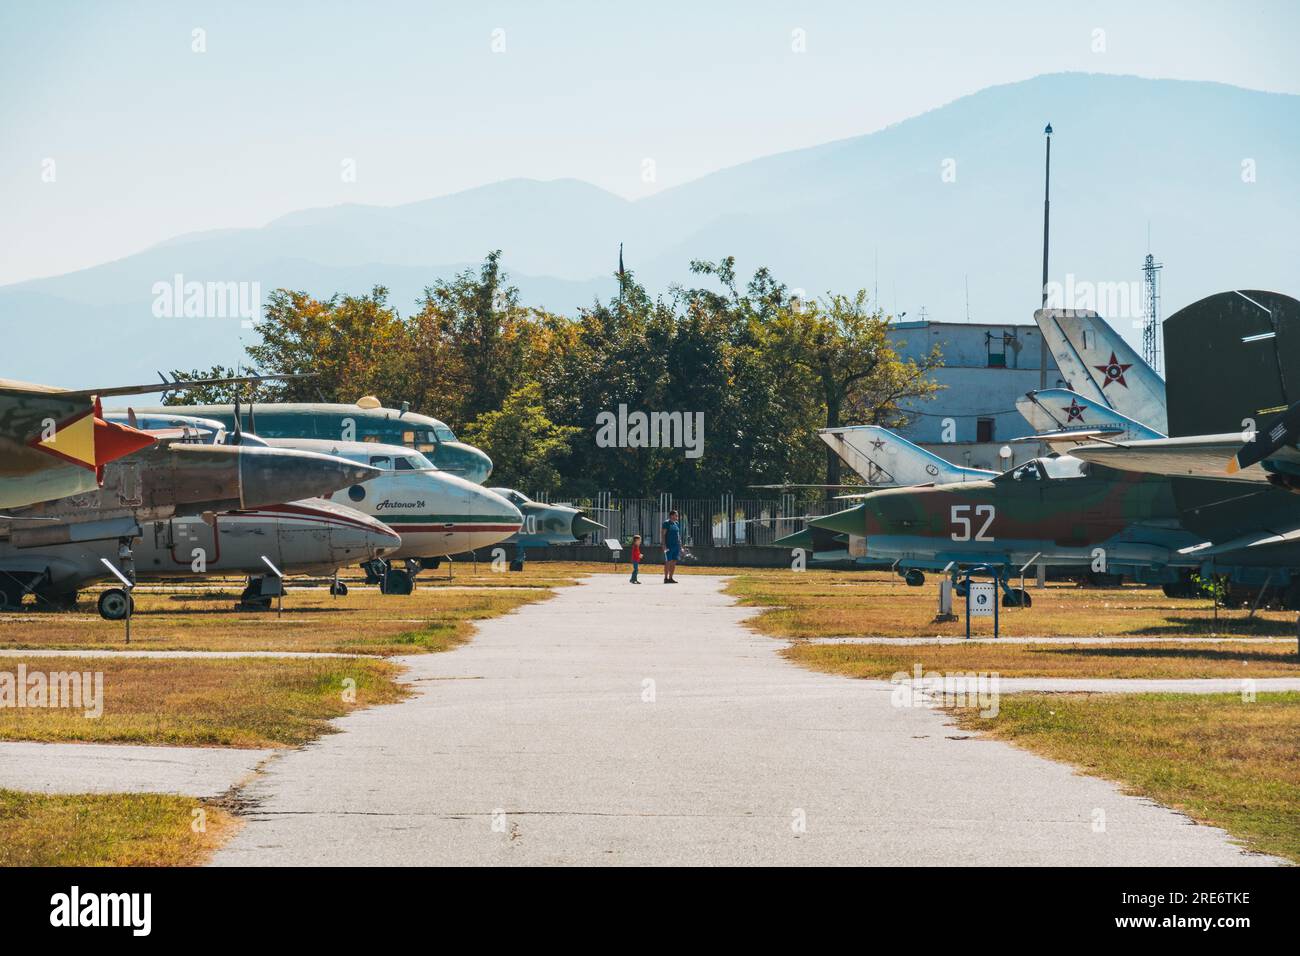 Soviet era aircraft on display outdoors at the Museum of Aviation at Plovdiv Airport, Bulgaria Stock Photo